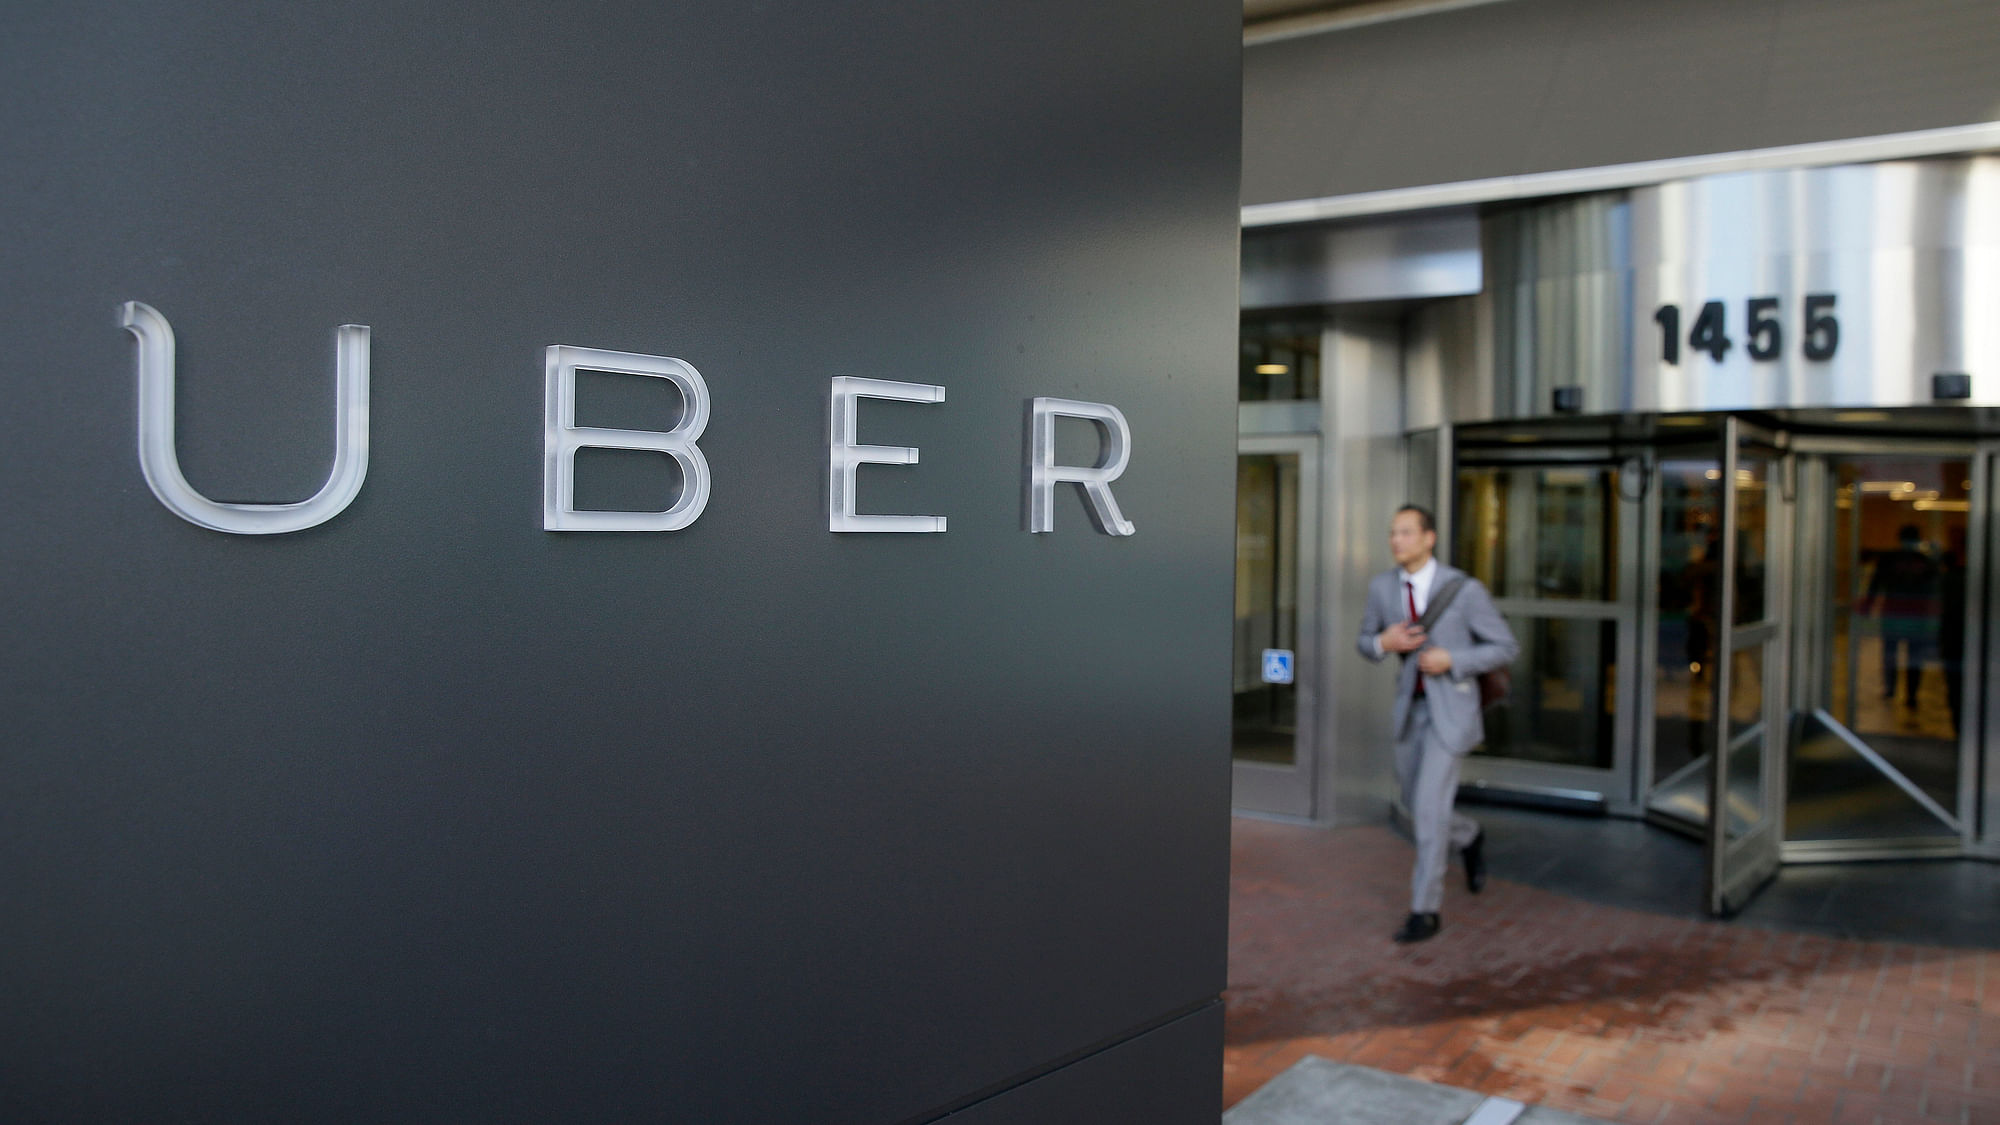 Uber for Business is a corporate-only entity, used by employees.